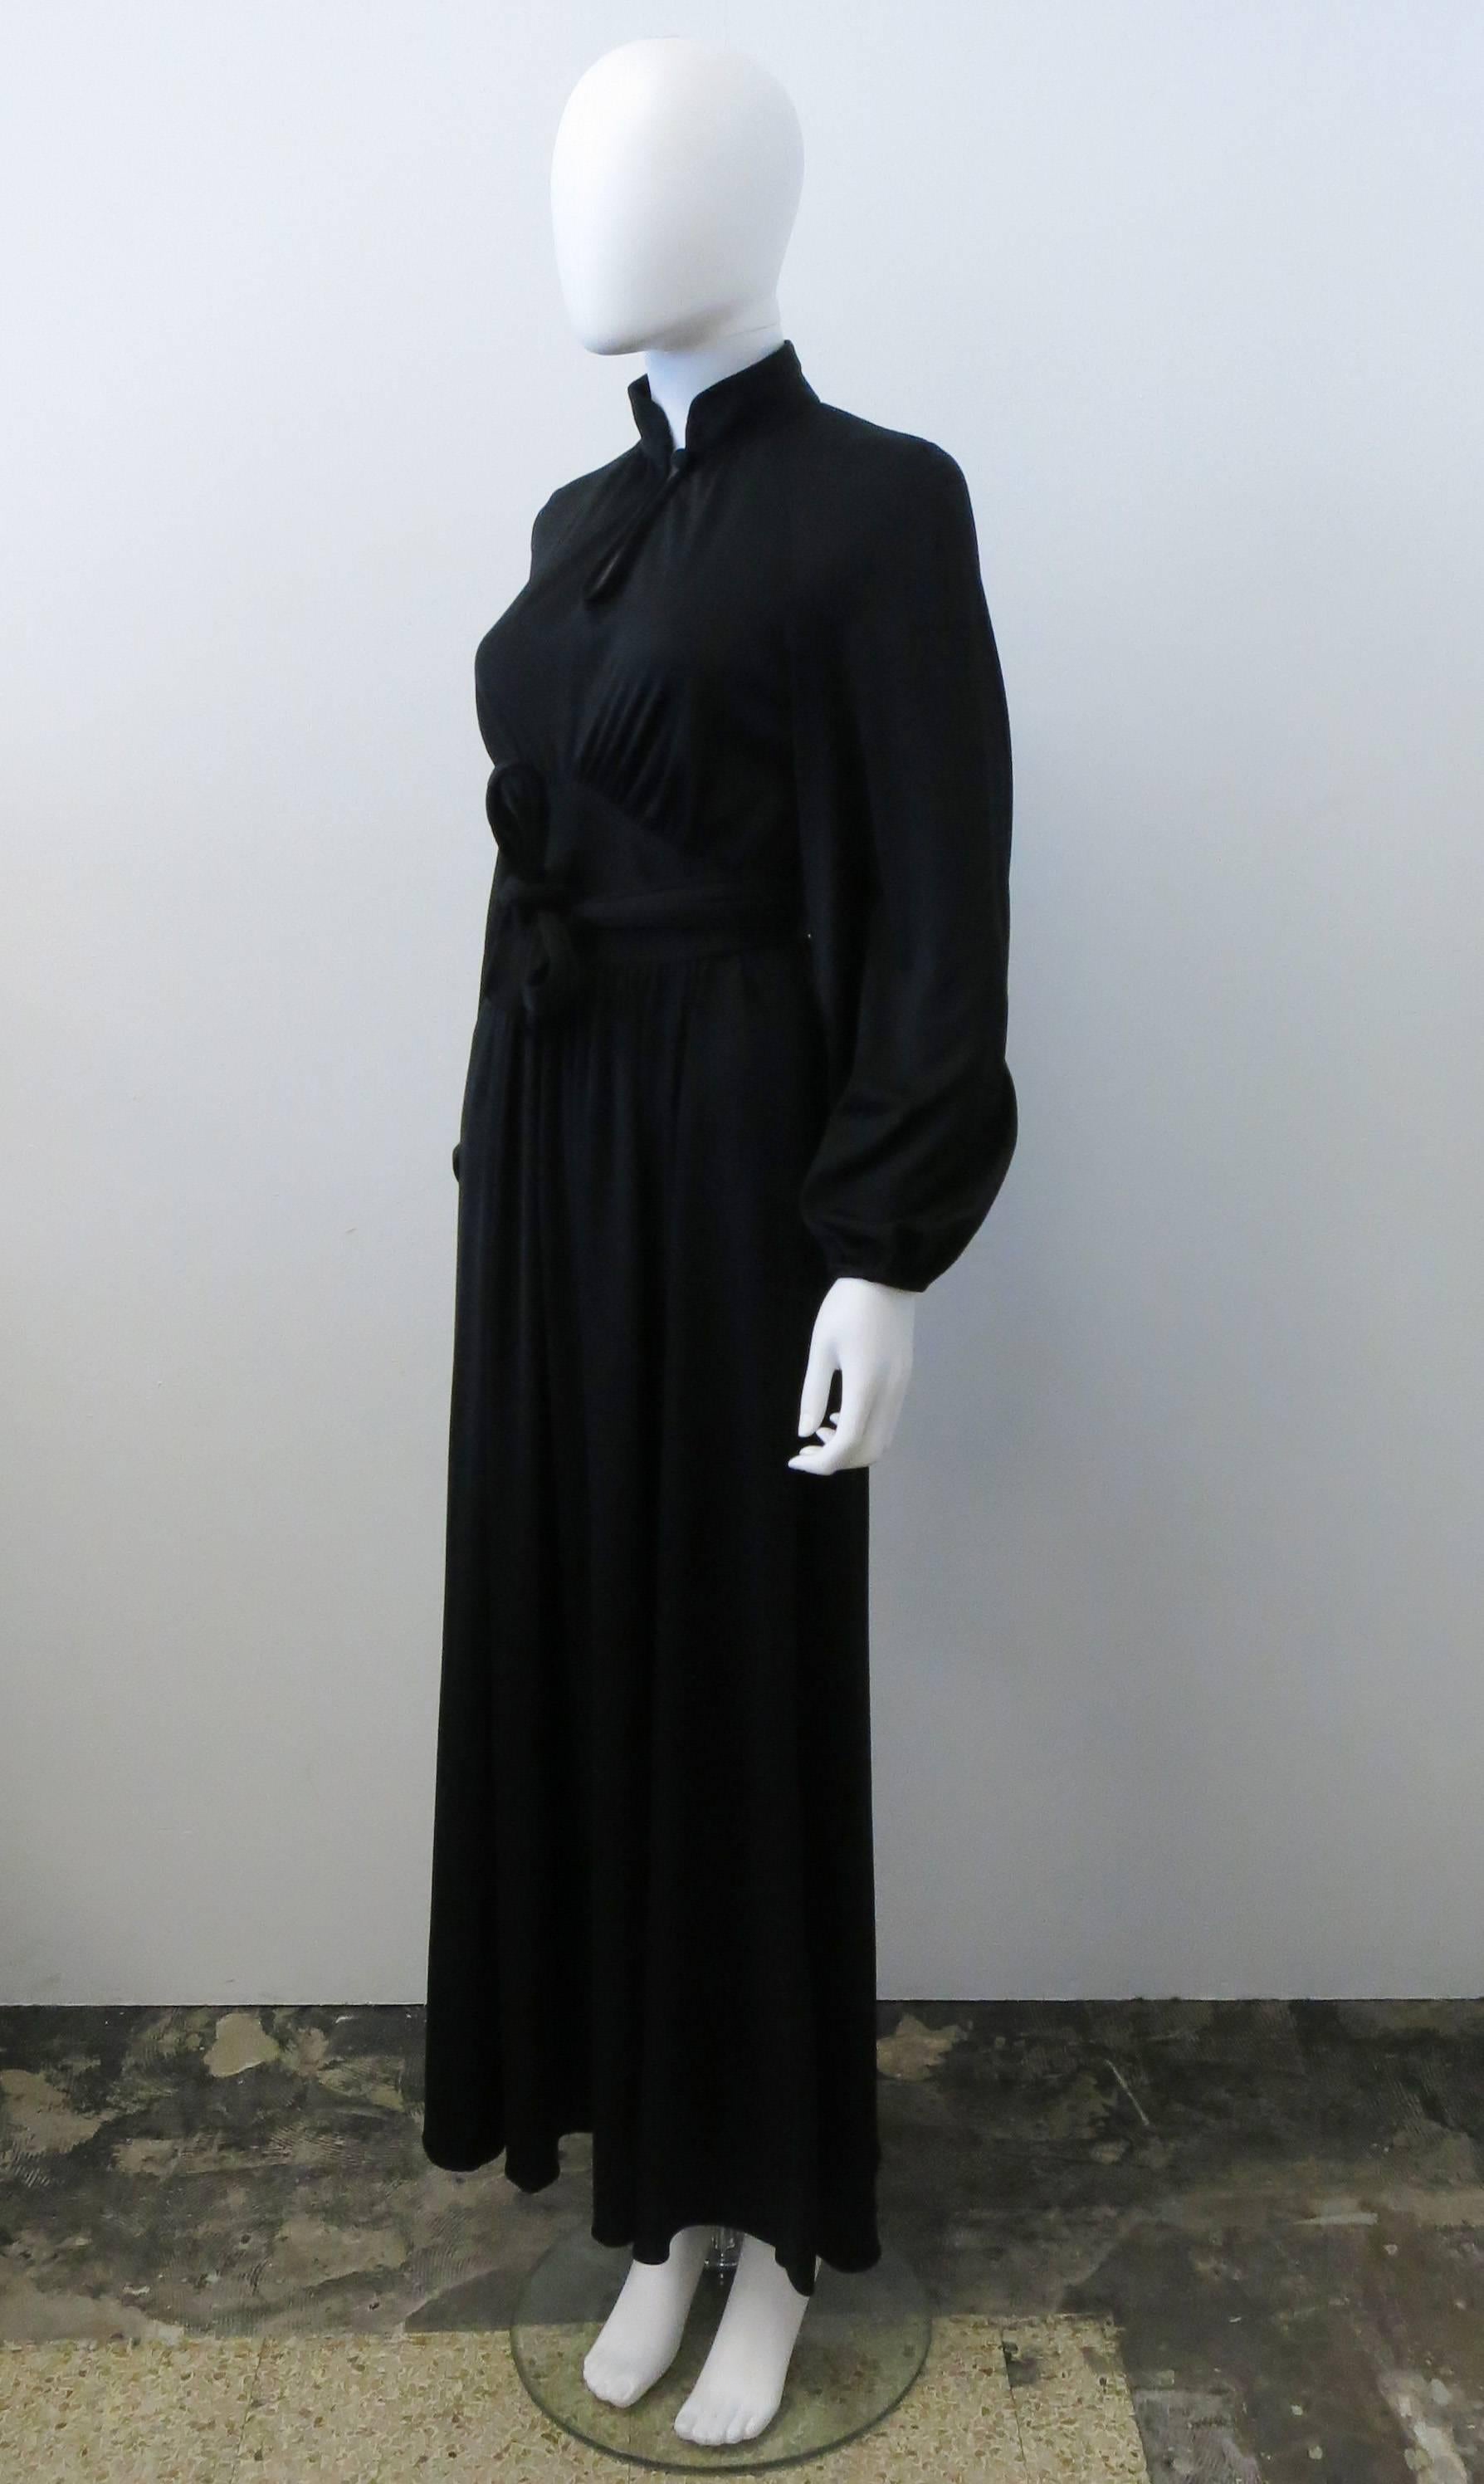 A 1970s black vintage bell-sleeve dress by British label Quorum from designer Marie France. The dress has a beautiful and iconic 70’s silhouette with long sleeves, mandarin collar and keyhole neckline, fitted waist and soft flowing pleats in the